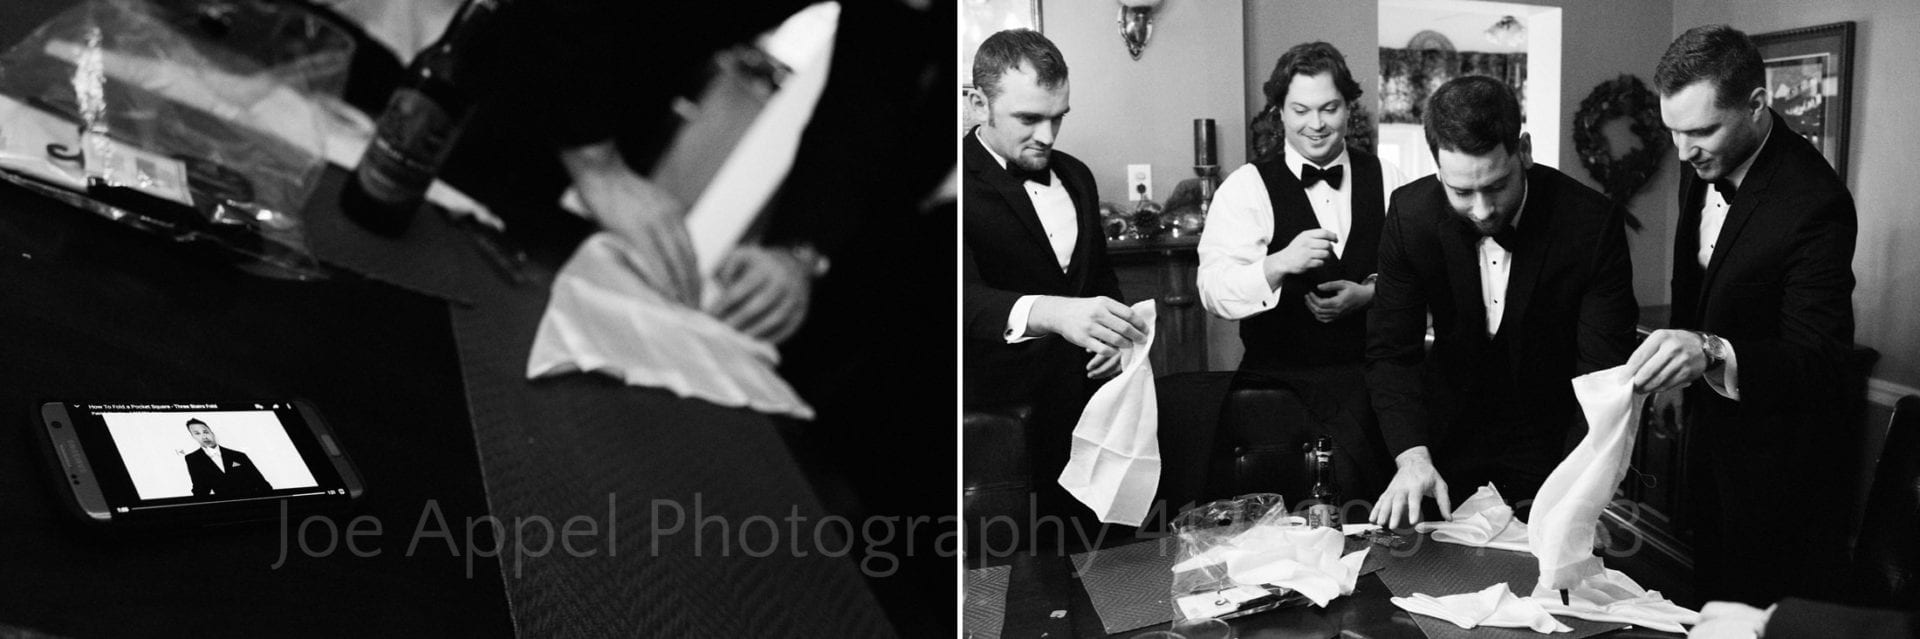 Two photos: The first shows a mobile phone with a video of how to fold a pocket square in the foreground while a man folds a pocket square in the background. The second one shows four young men around a table folding pocket squares.